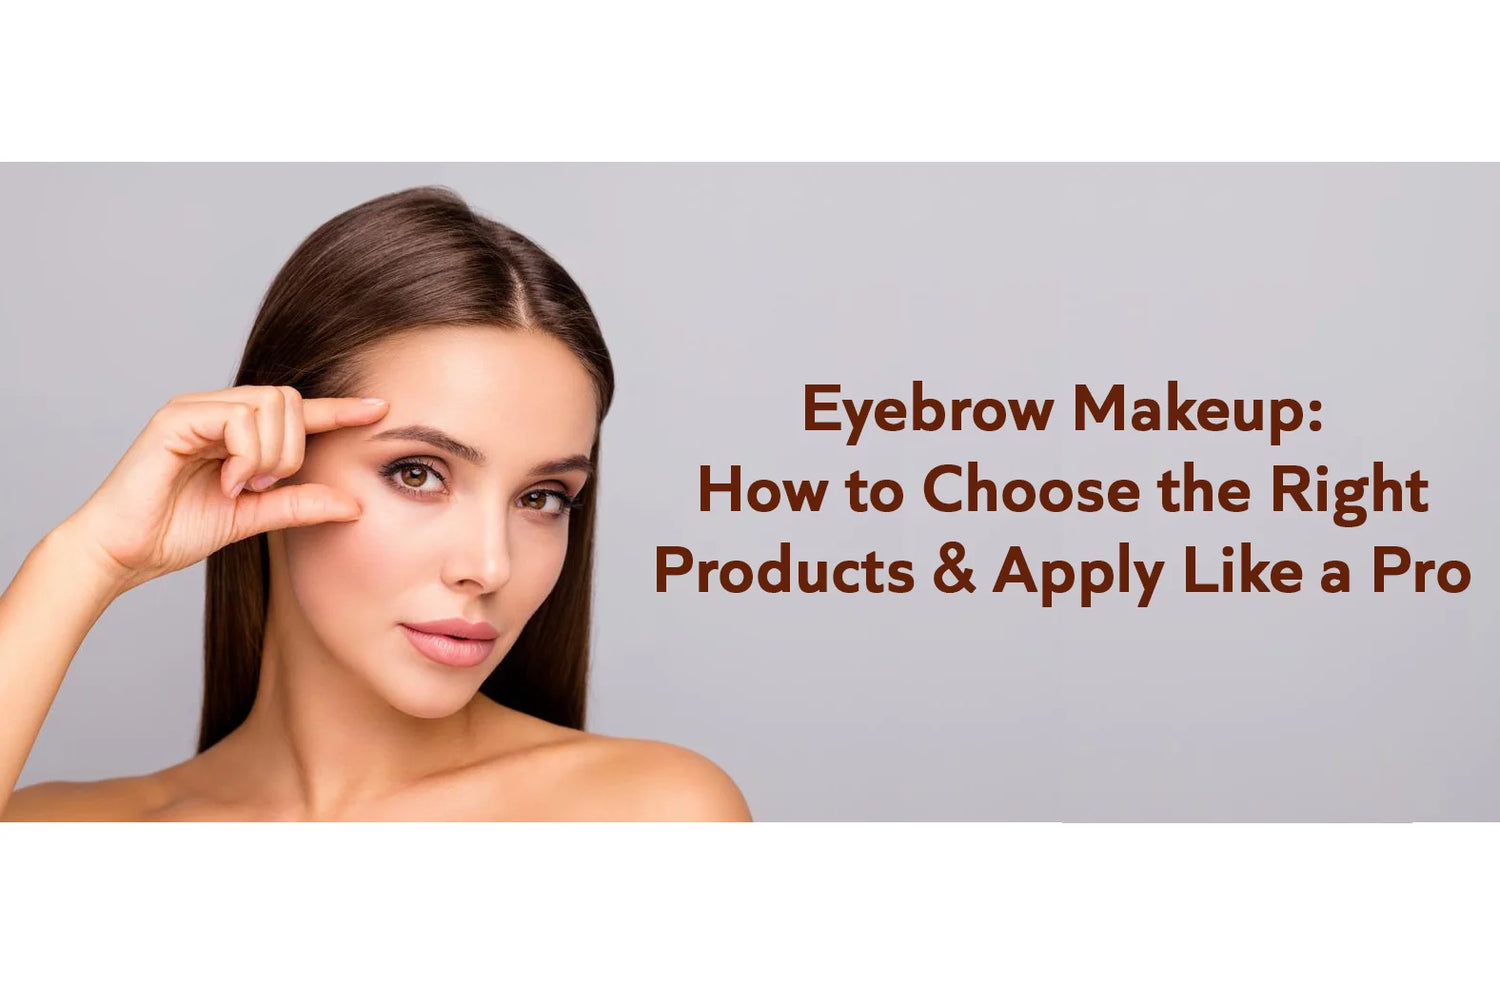 Eyebrow Makeup: How to Choose the Right Products & Apply Like a Pro